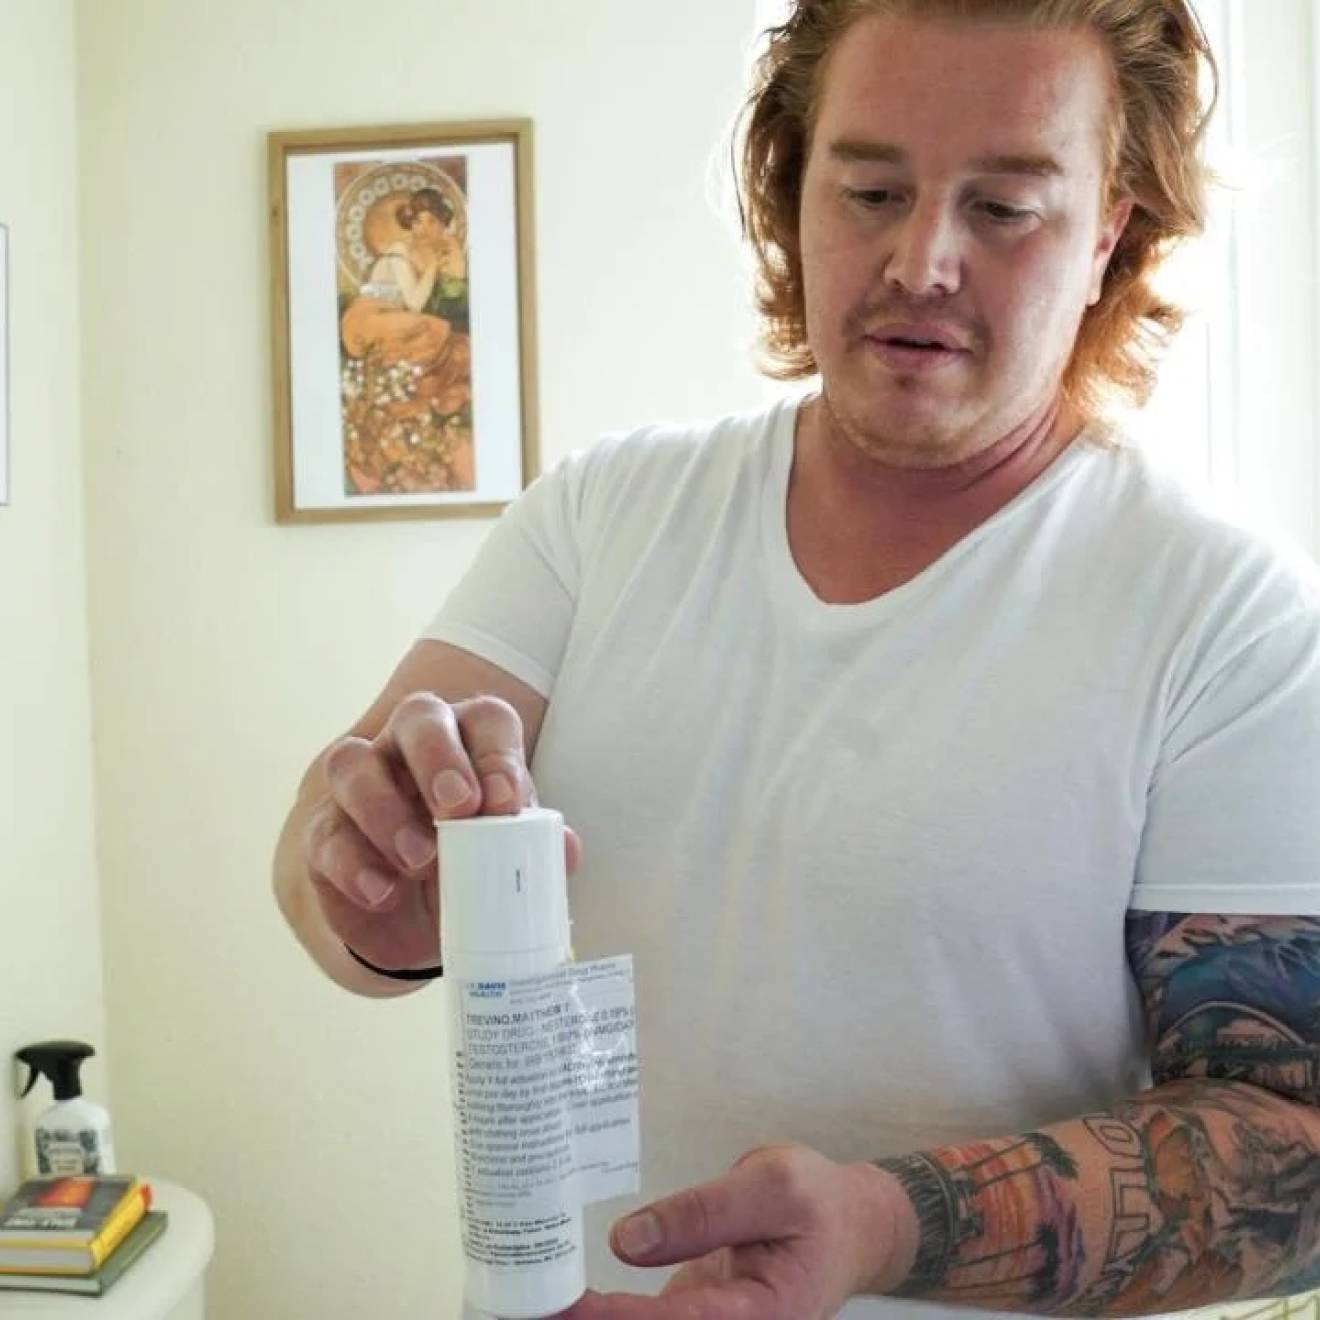 A man with arm tattoos in a white t-shirt holds a white plastic bottle, standing in a well lit room with white walls.